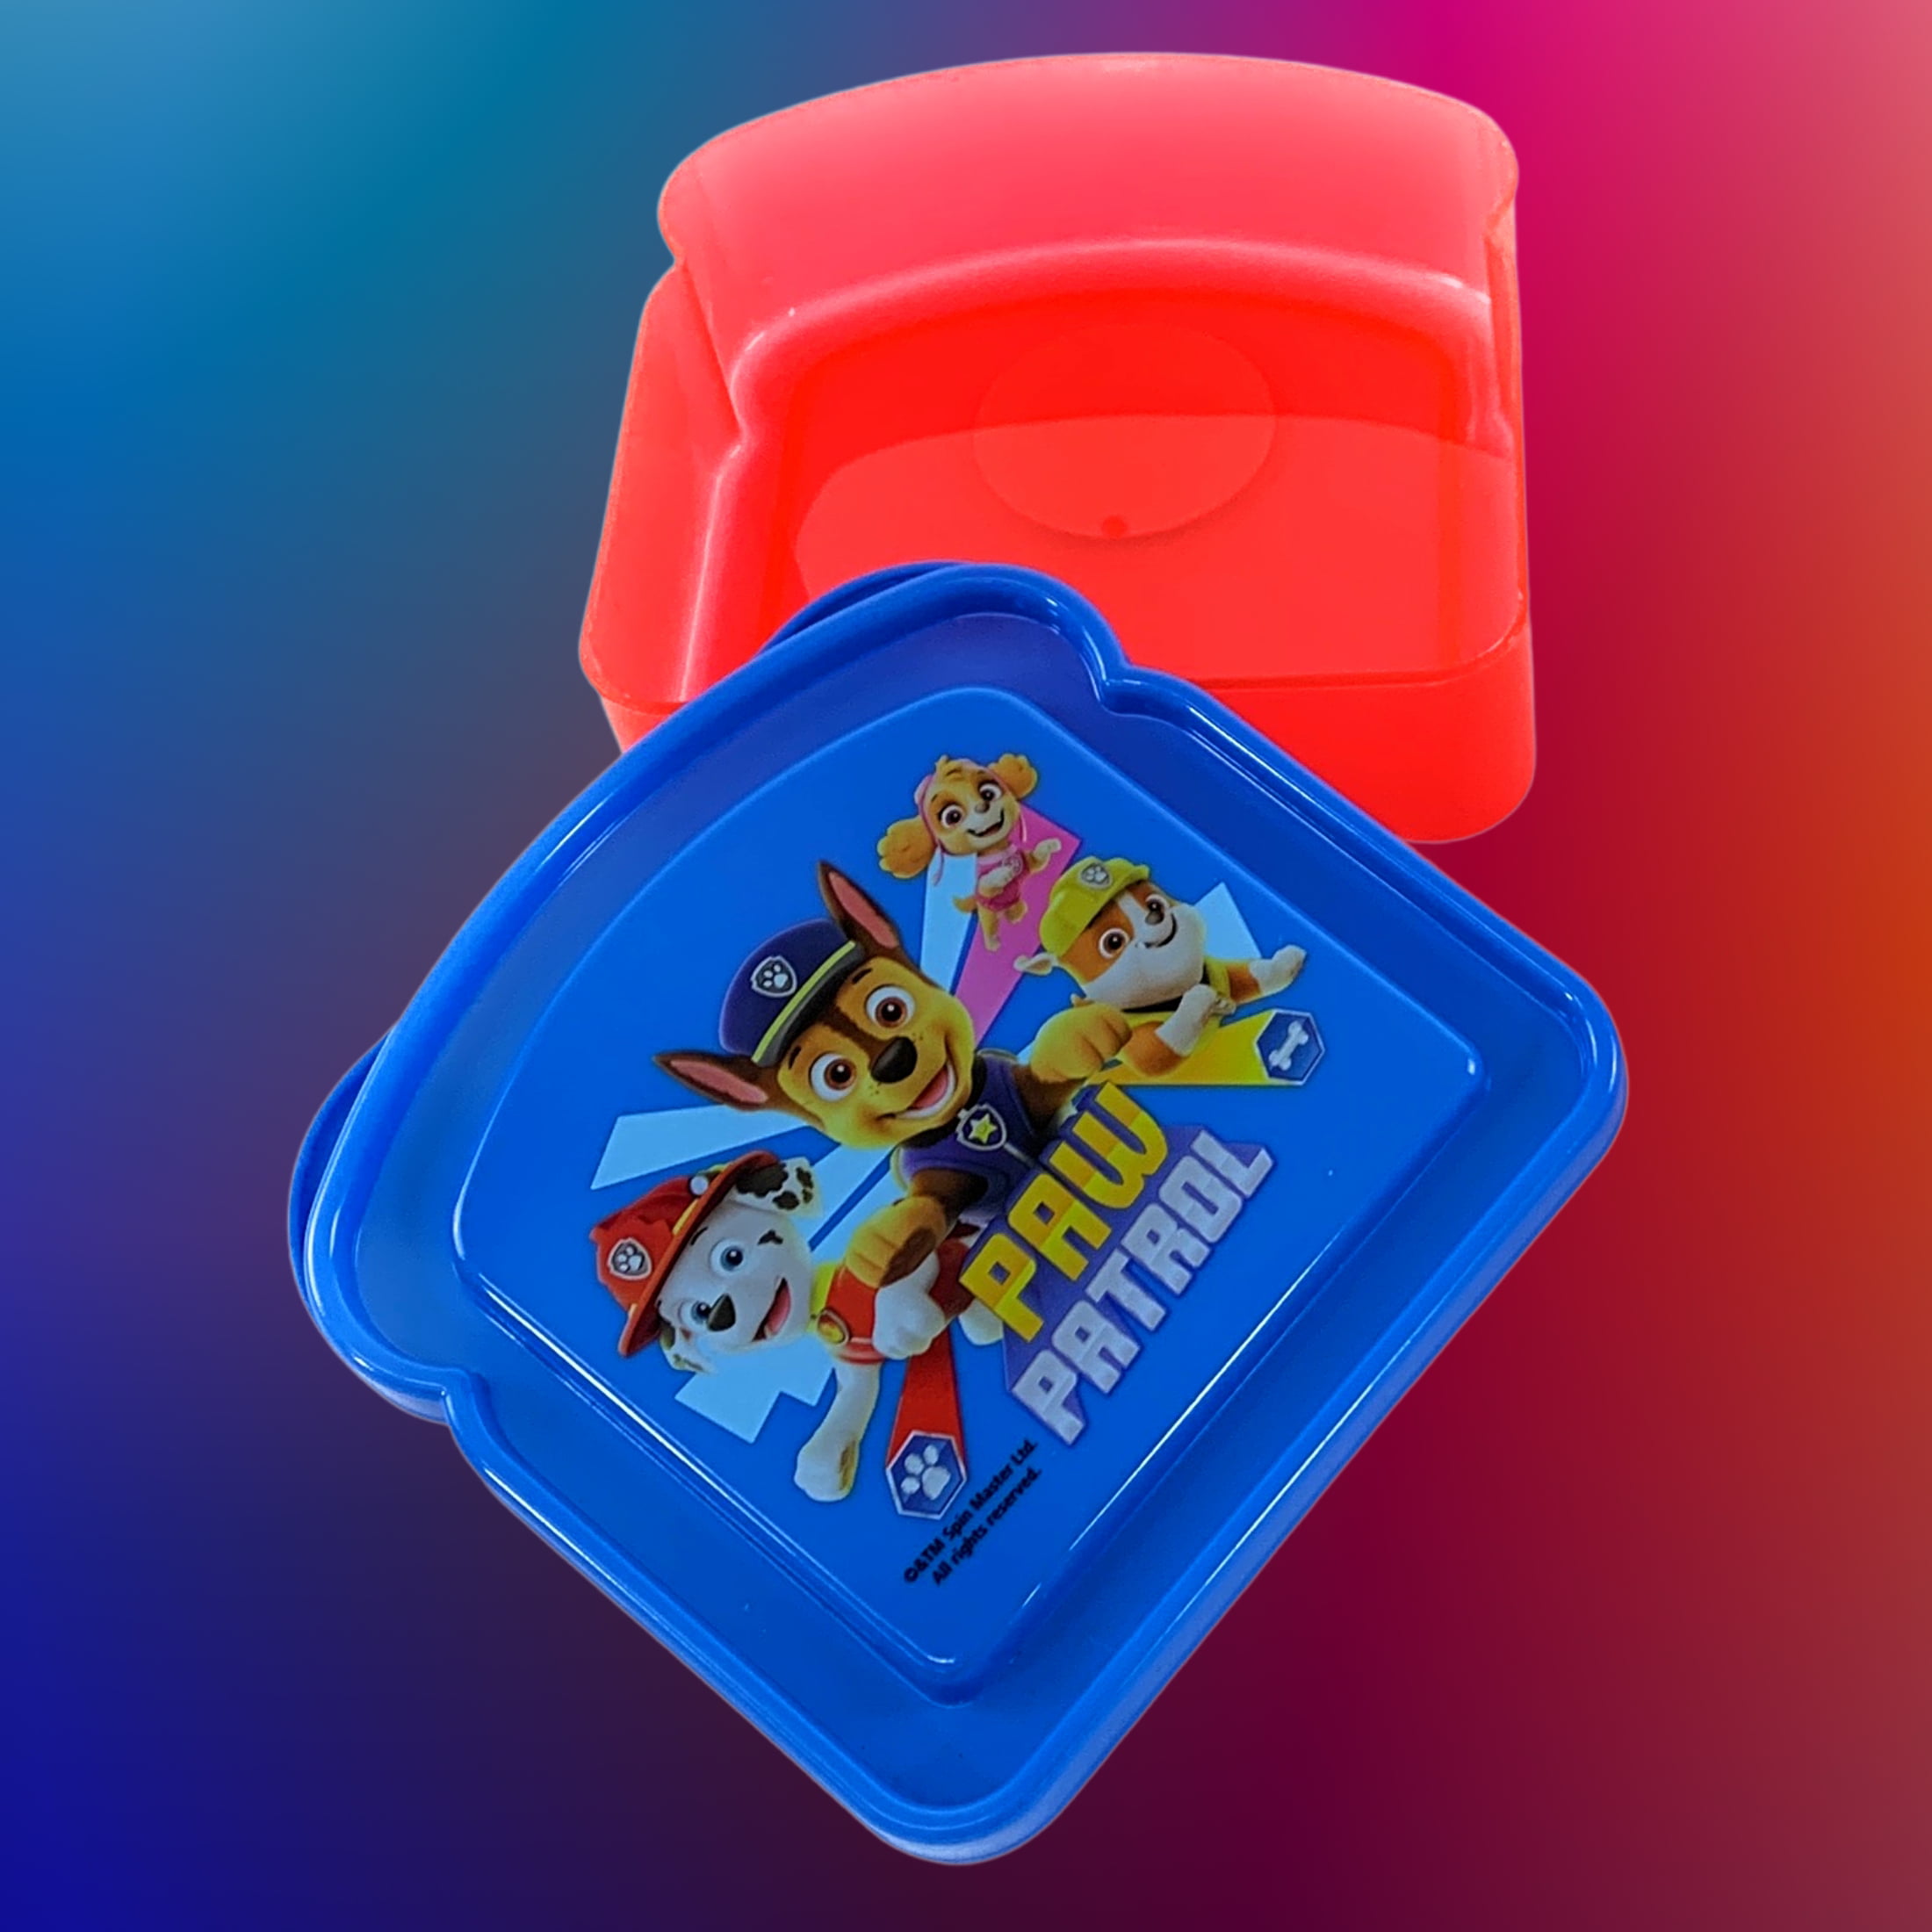 Paw Pup Patrol Lunch Box Kit for Kids Includes Plastic Snacks Storage and Sandwich Container BPA-Free, Dishwasher Safe Toddler-Friendly Lunch